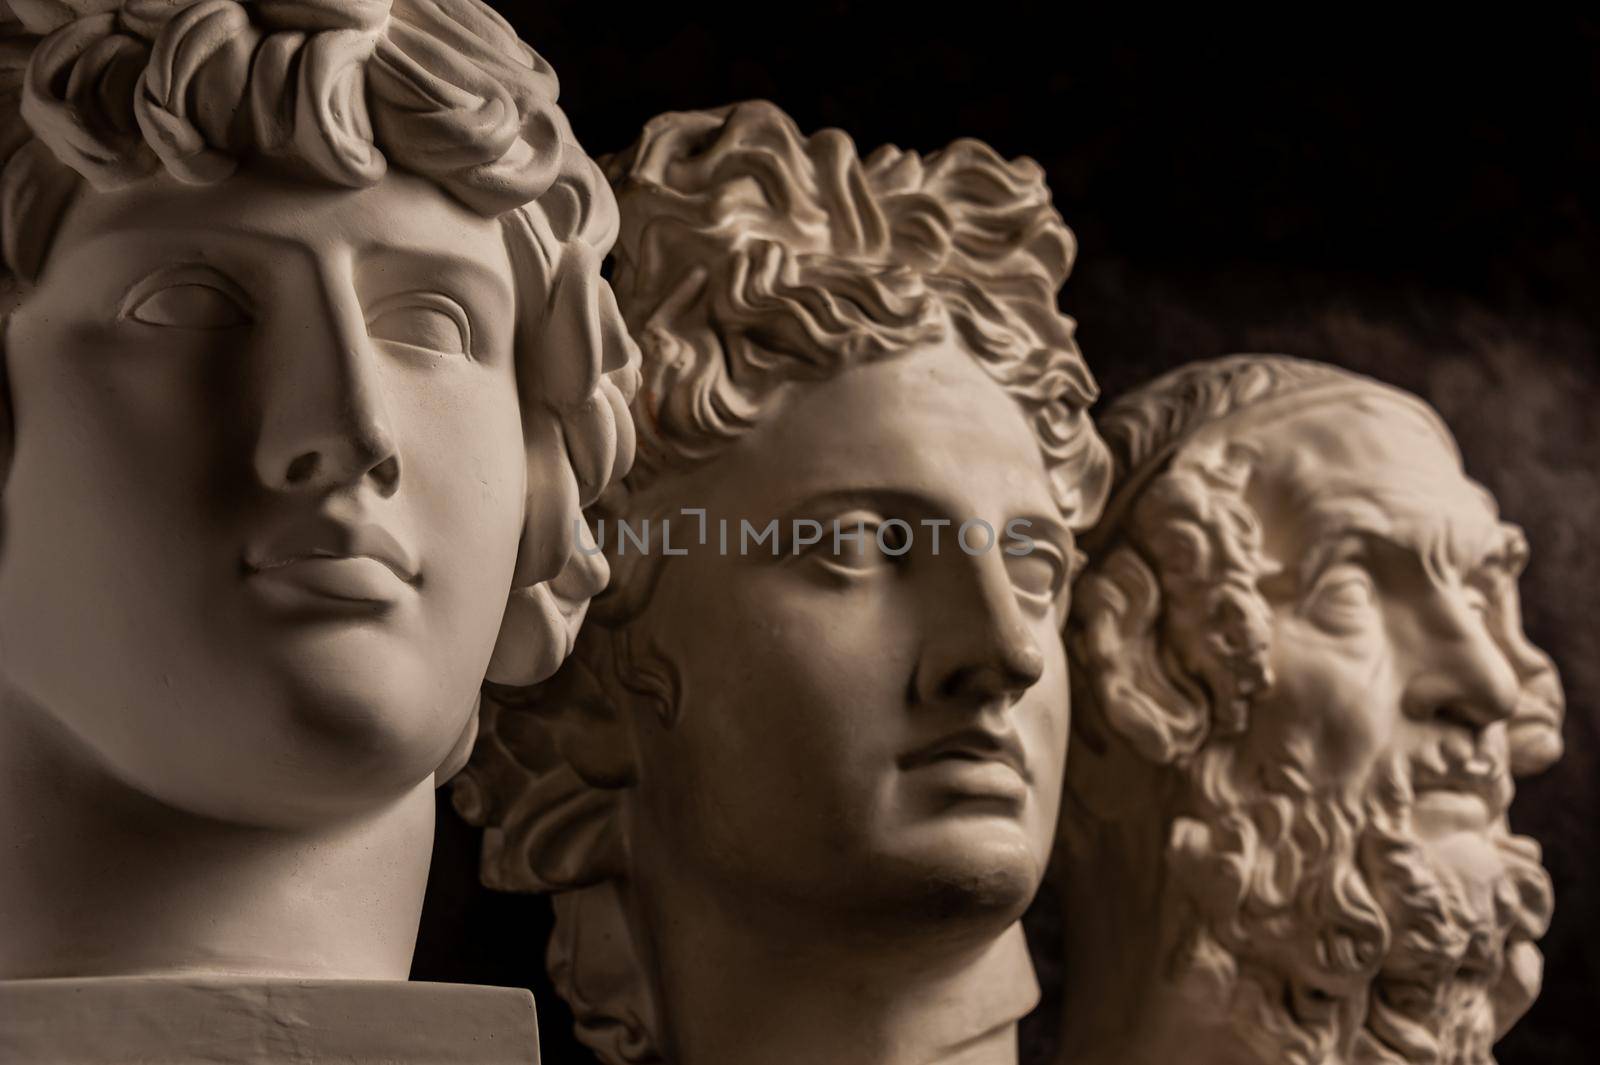 Group gypsum busts of ancient statues human heads for artists on a dark background. Plaster sculptures of antique people faces. Renaissance epoch style. Academic subject. Blank for creativity. by bashta